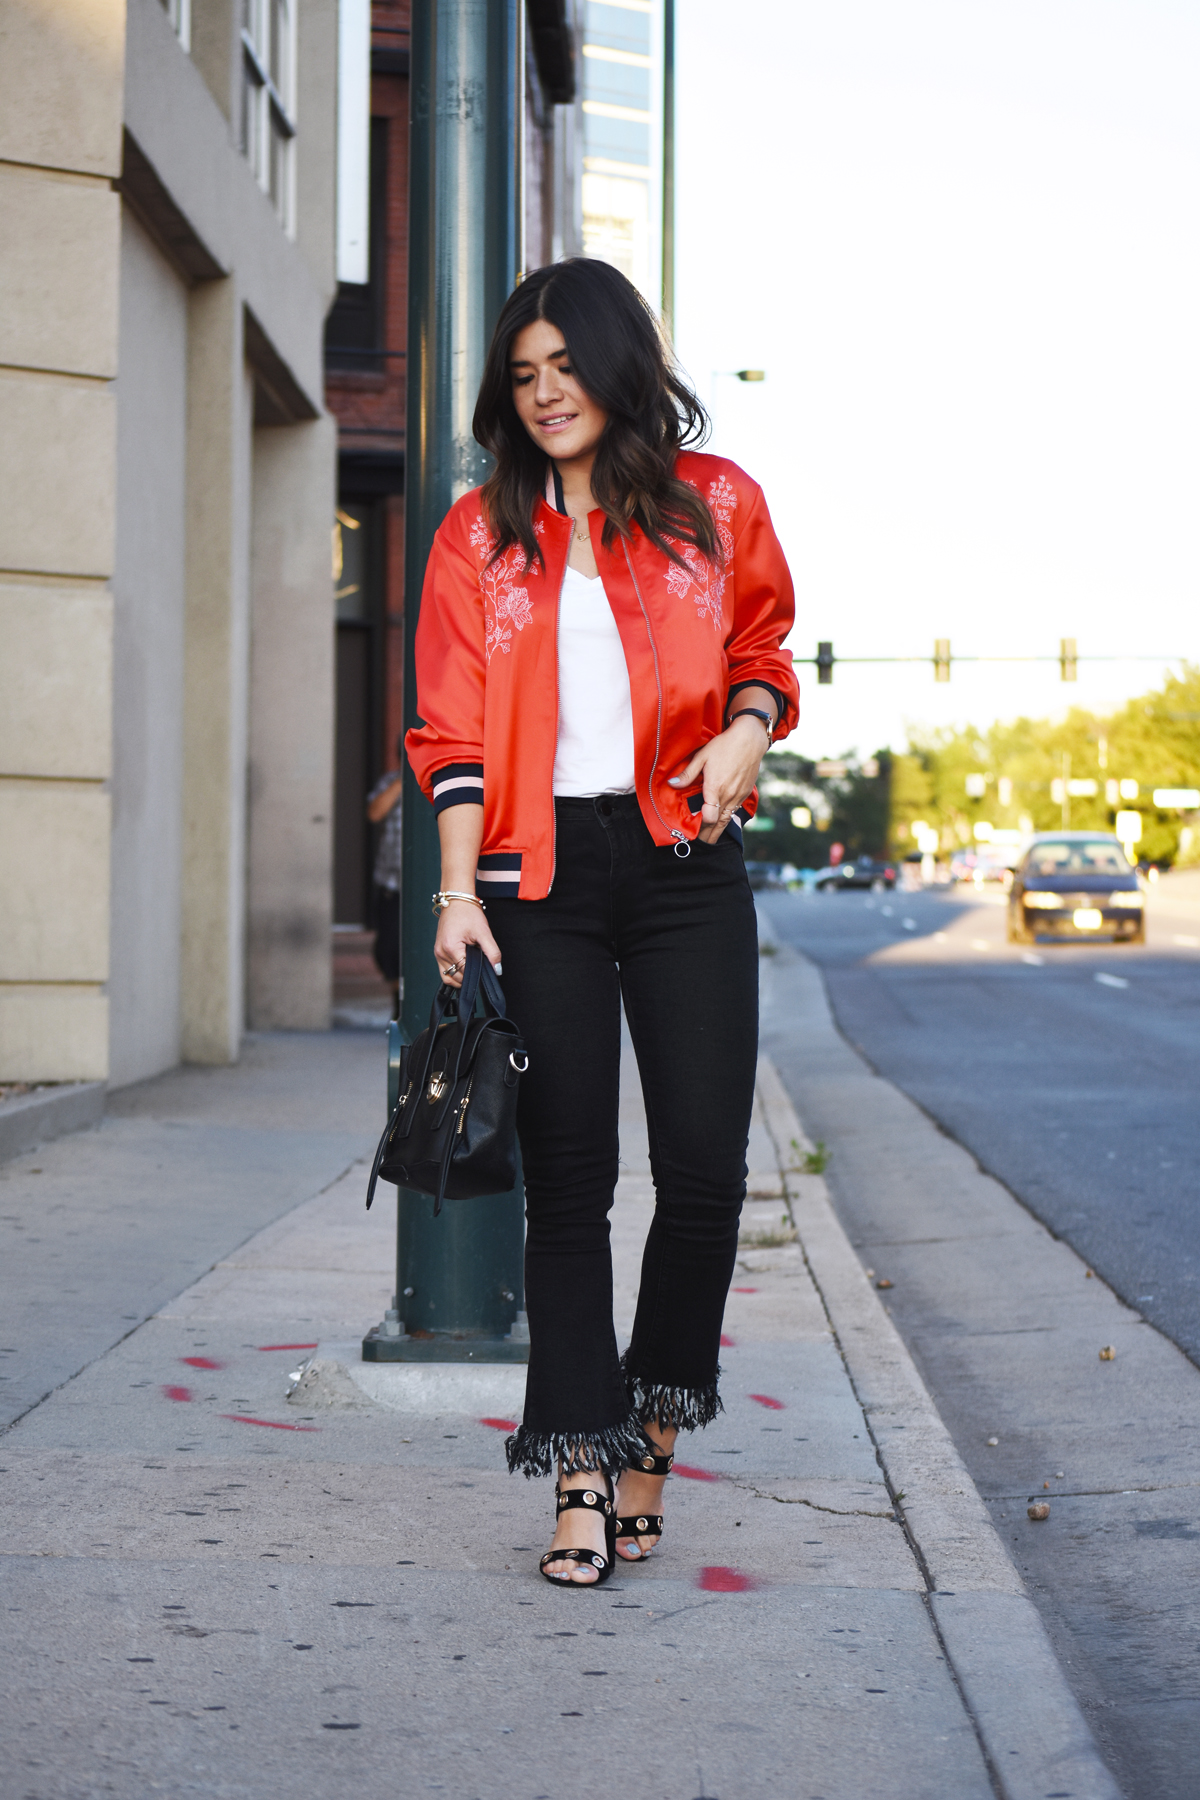 Carolina Hellal of Chic Talk wearing a red H&M Bomber jacket, Dezzal fringed jeans, and Public Desire black sandals